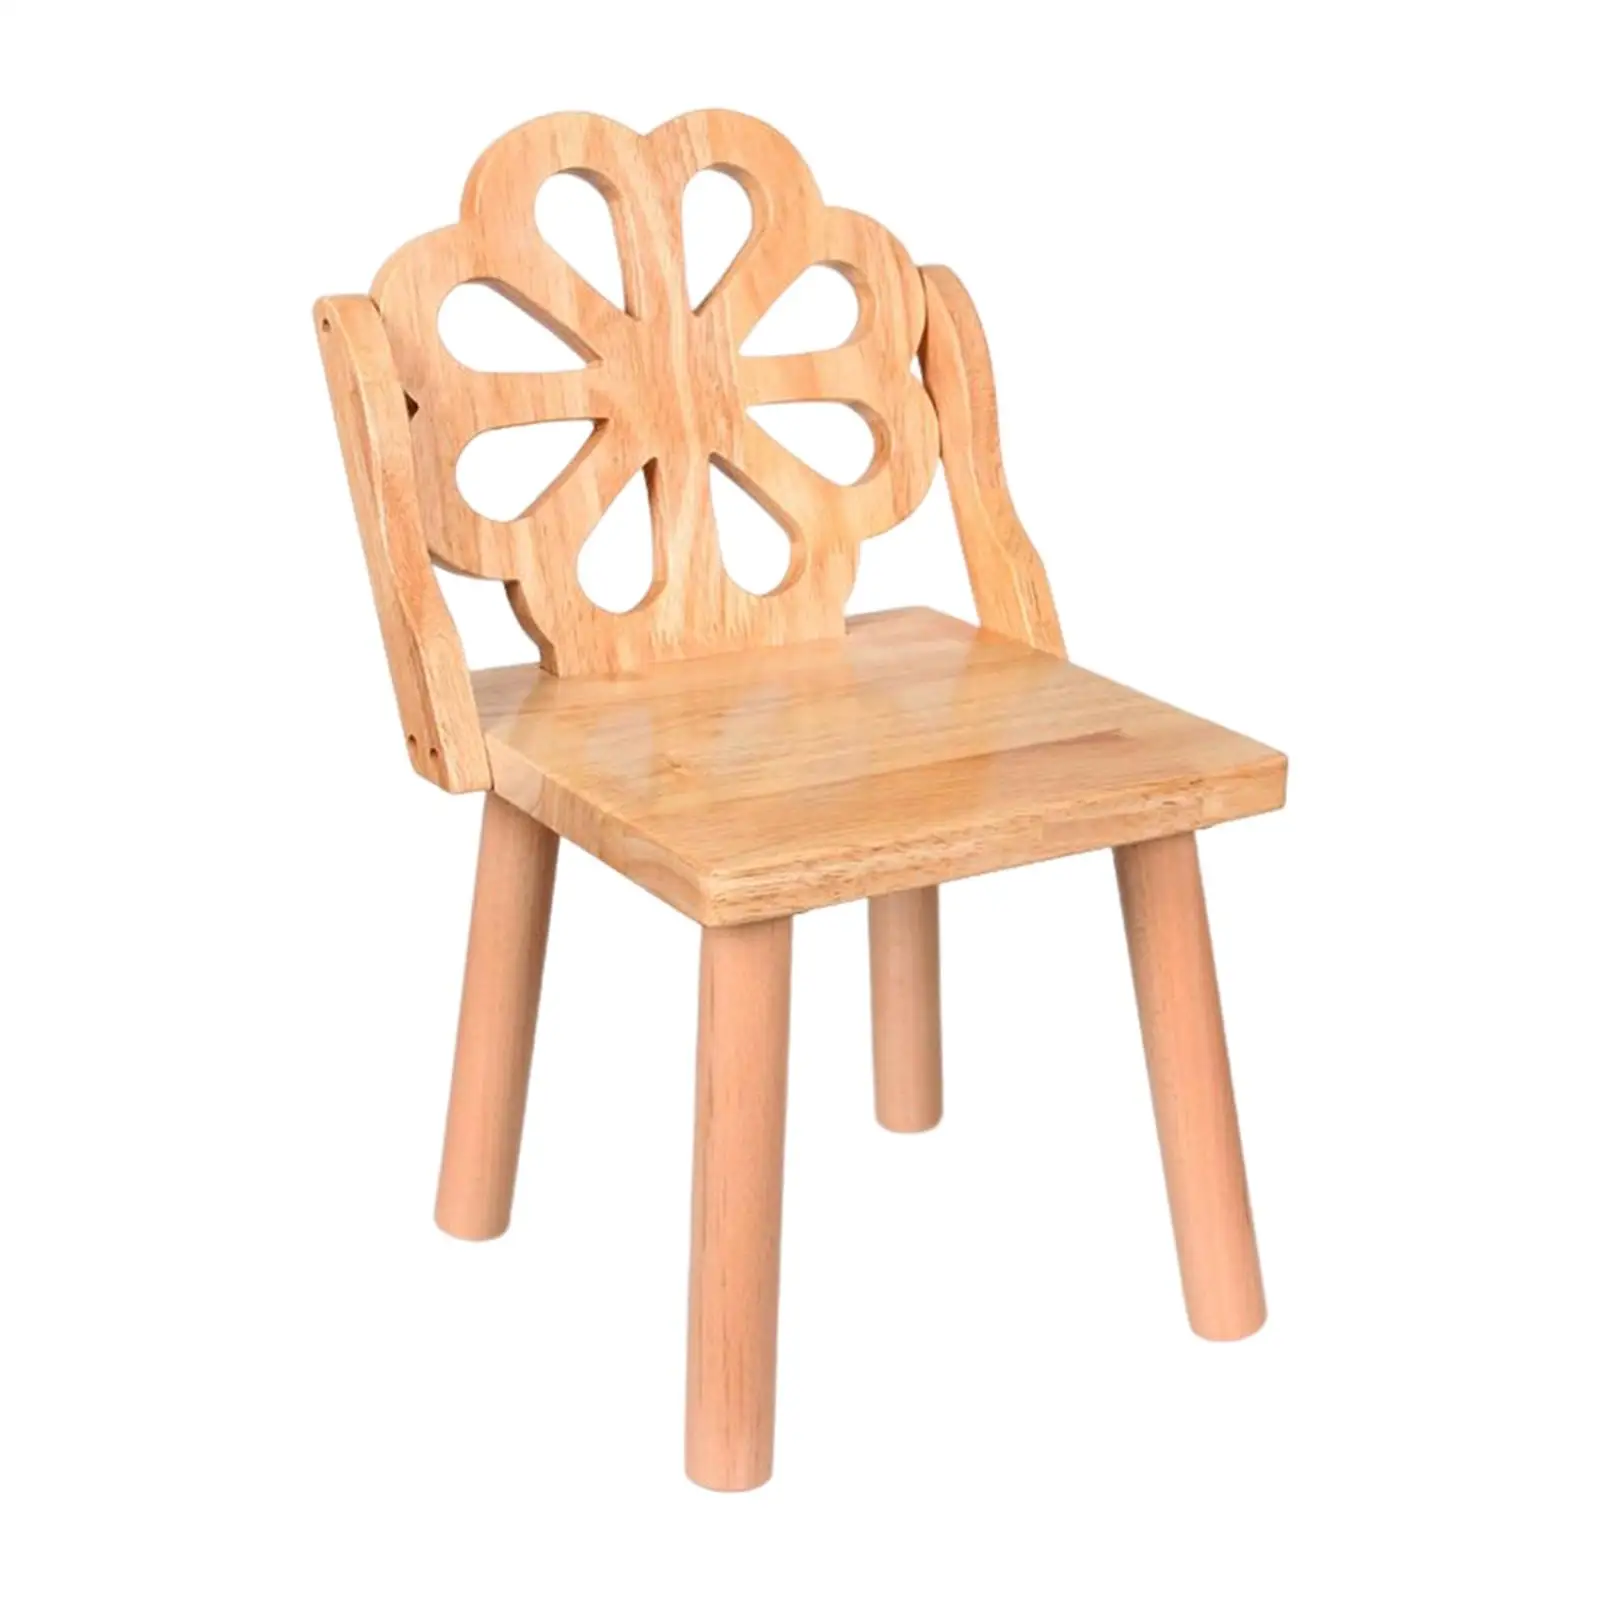 Wood Removable Wooden Child Stool Space Saving Ultralight Small Seat Stool for Kids